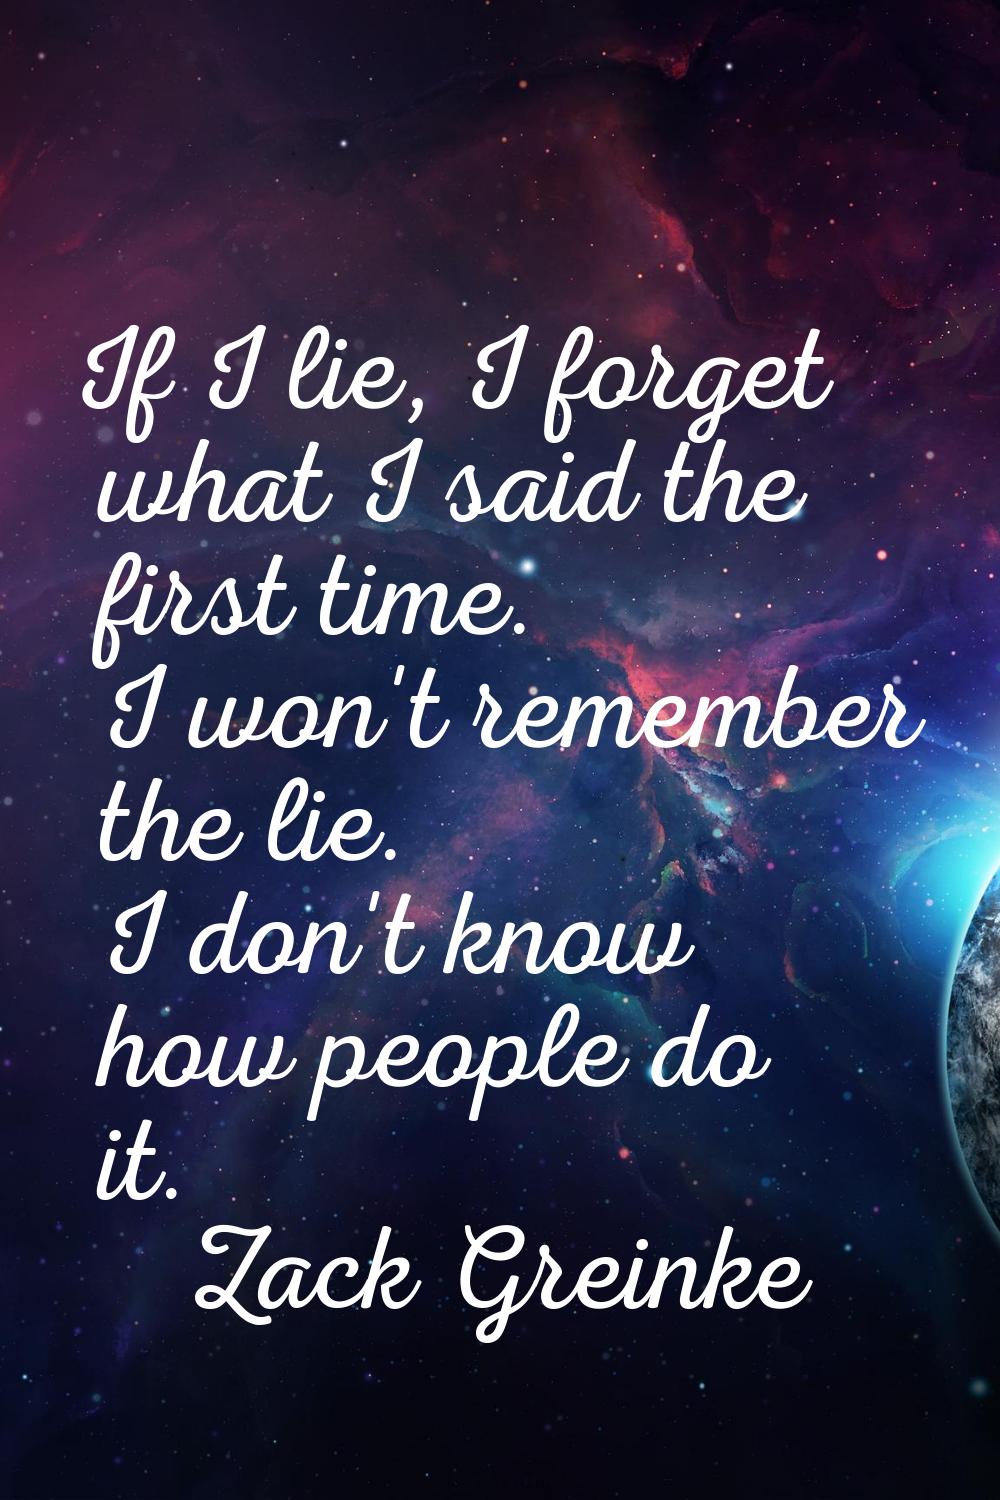 If I lie, I forget what I said the first time. I won't remember the lie. I don't know how people do